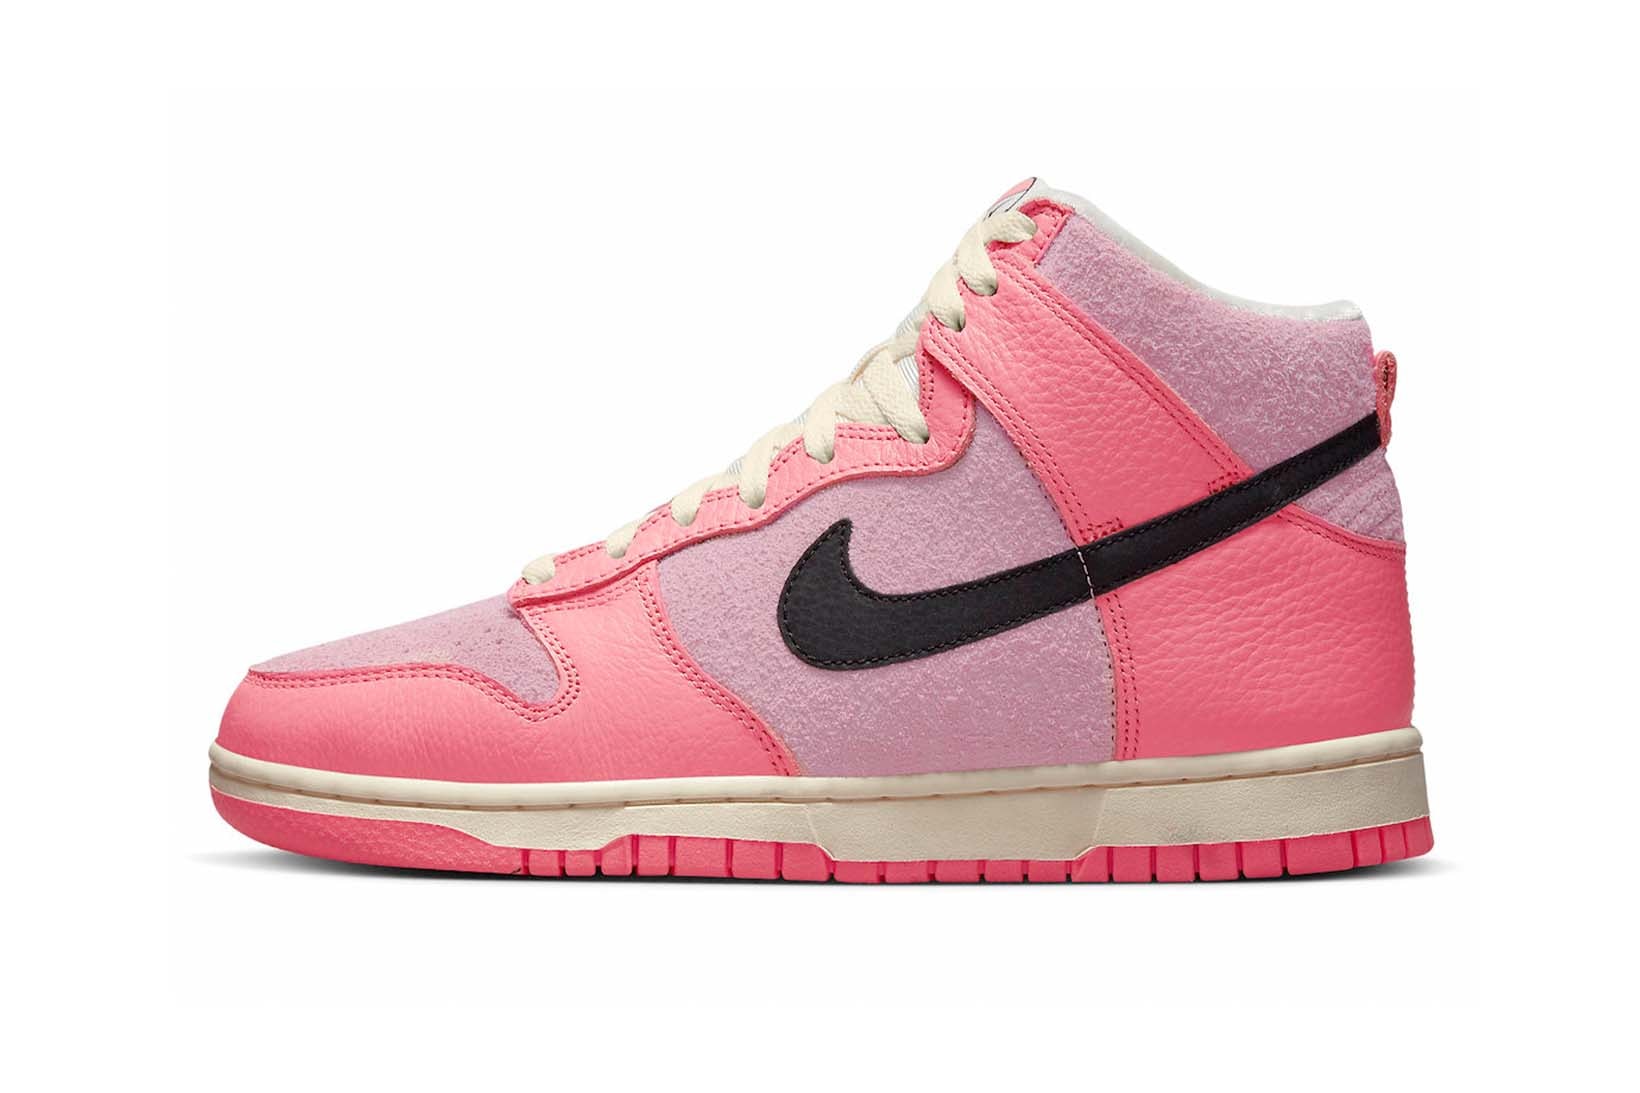 Nike Dunk High Hoops Pink DX3359-600 Price Release Info